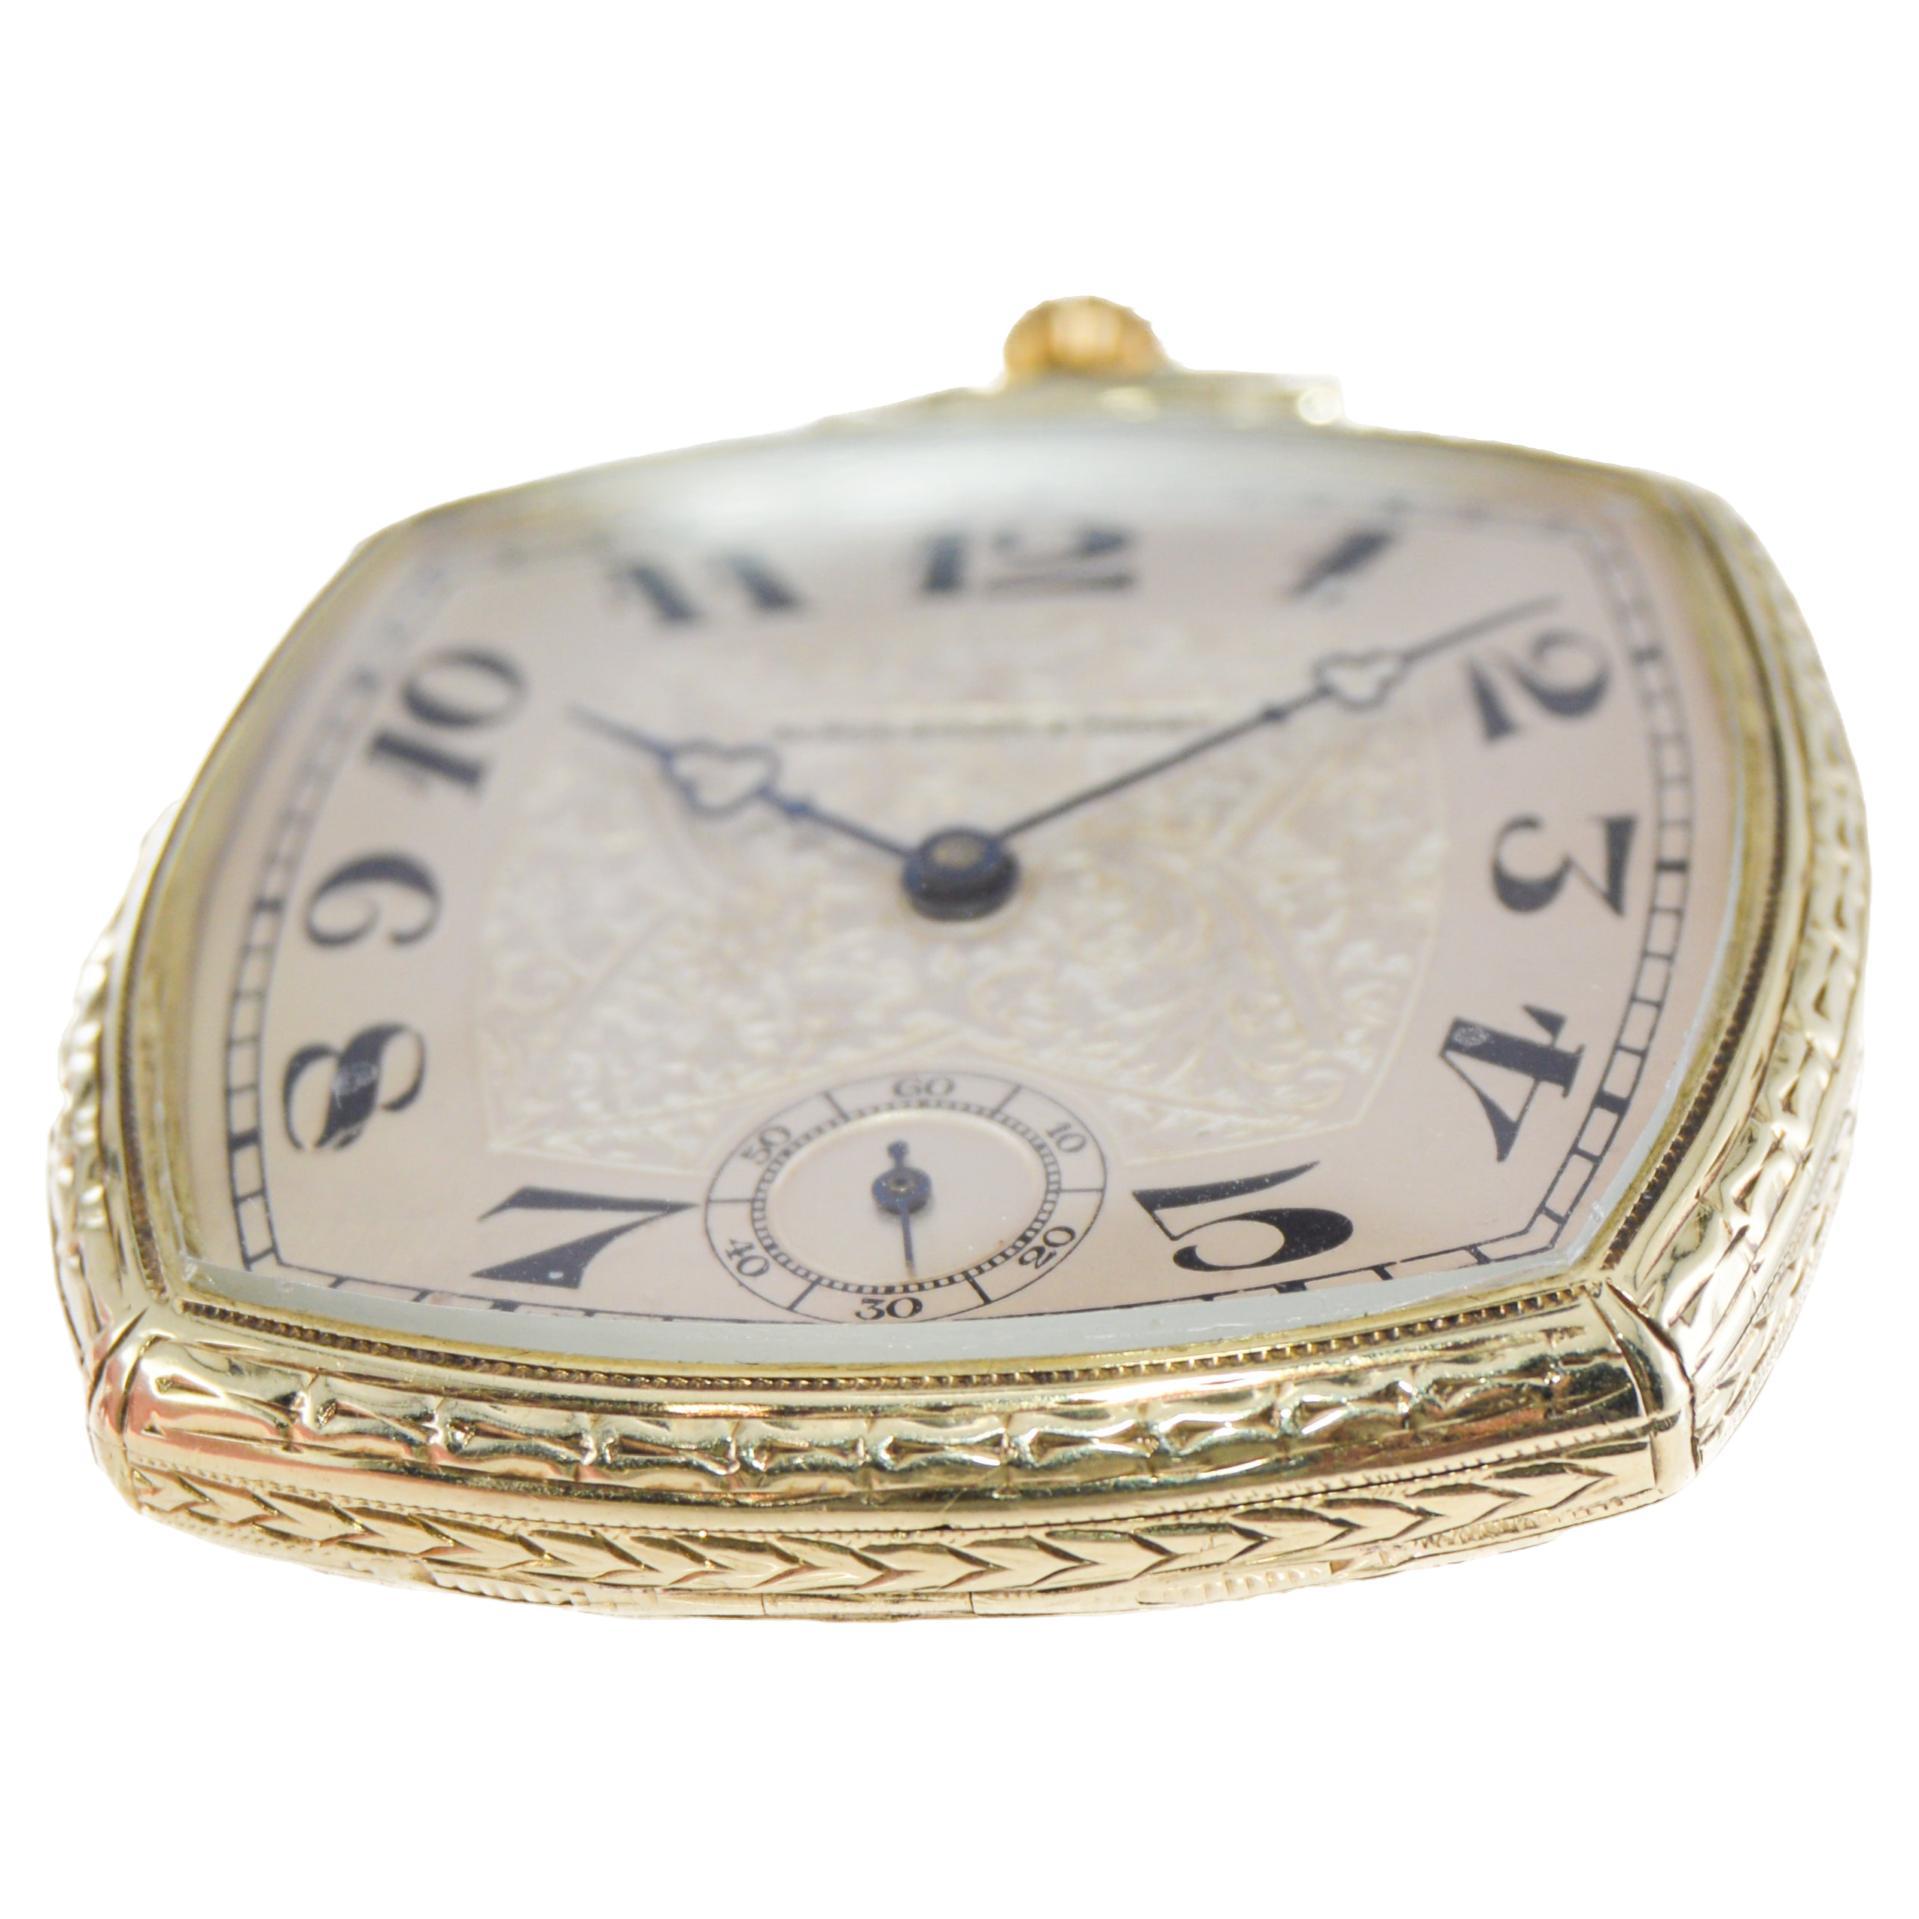 Black Starr & Frost 14 Karat Gold Art Deco Pocket Watch with Engraved Dial  For Sale 4